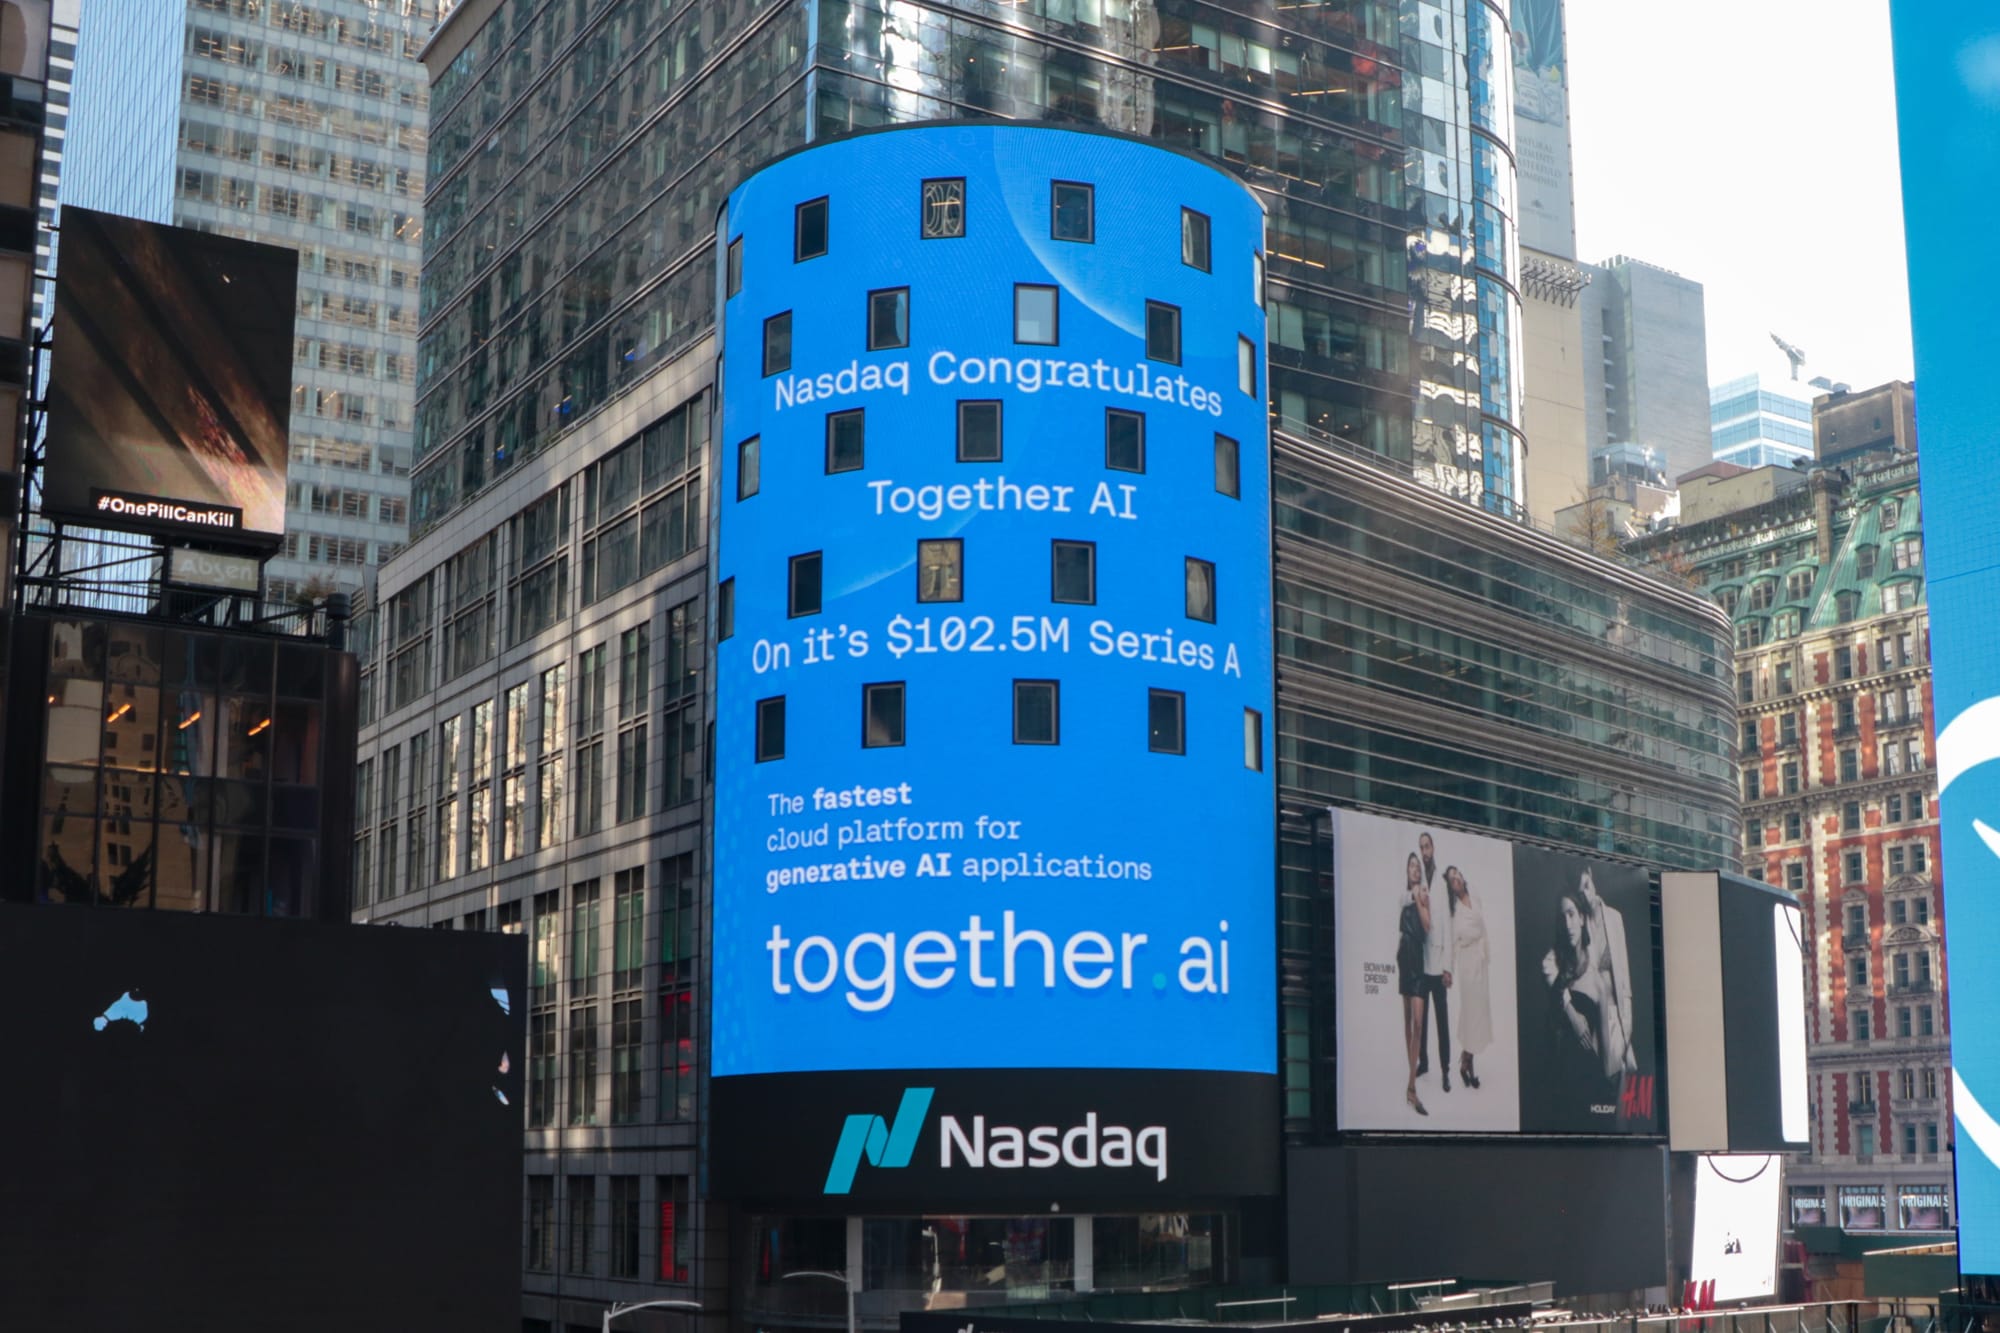 Together AI announces its $102.5M Series A